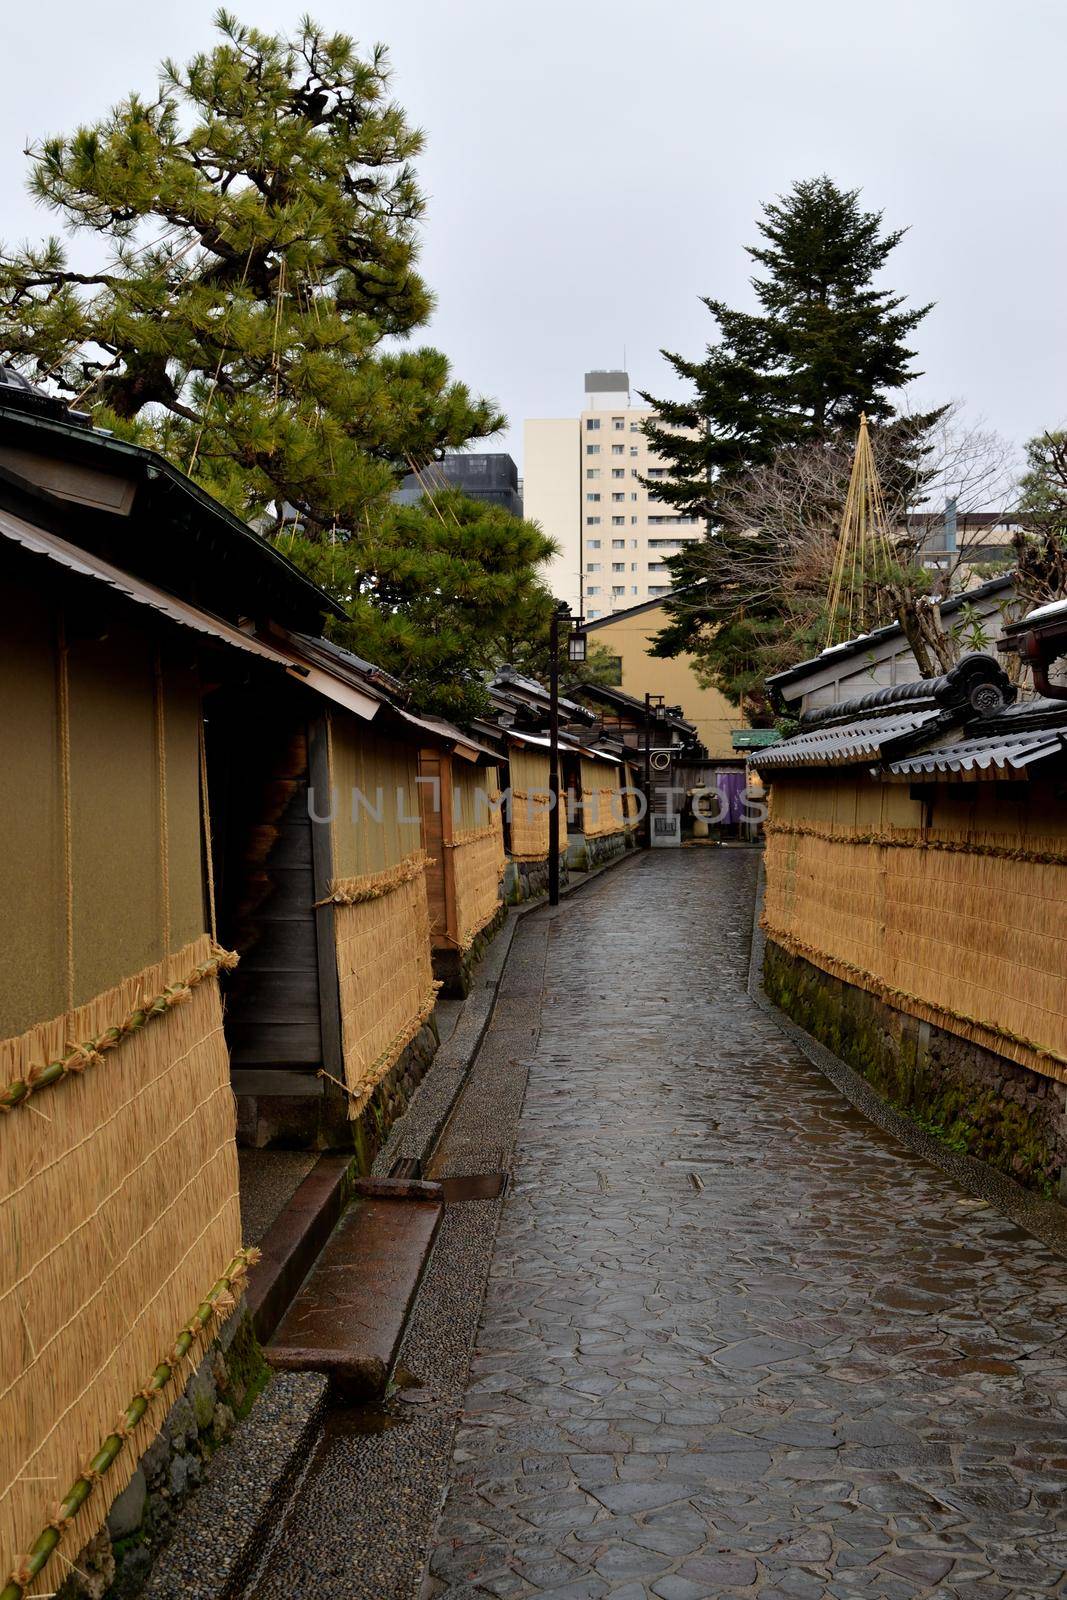 View of a alley in the samurai district, Kanazawa by silentstock639